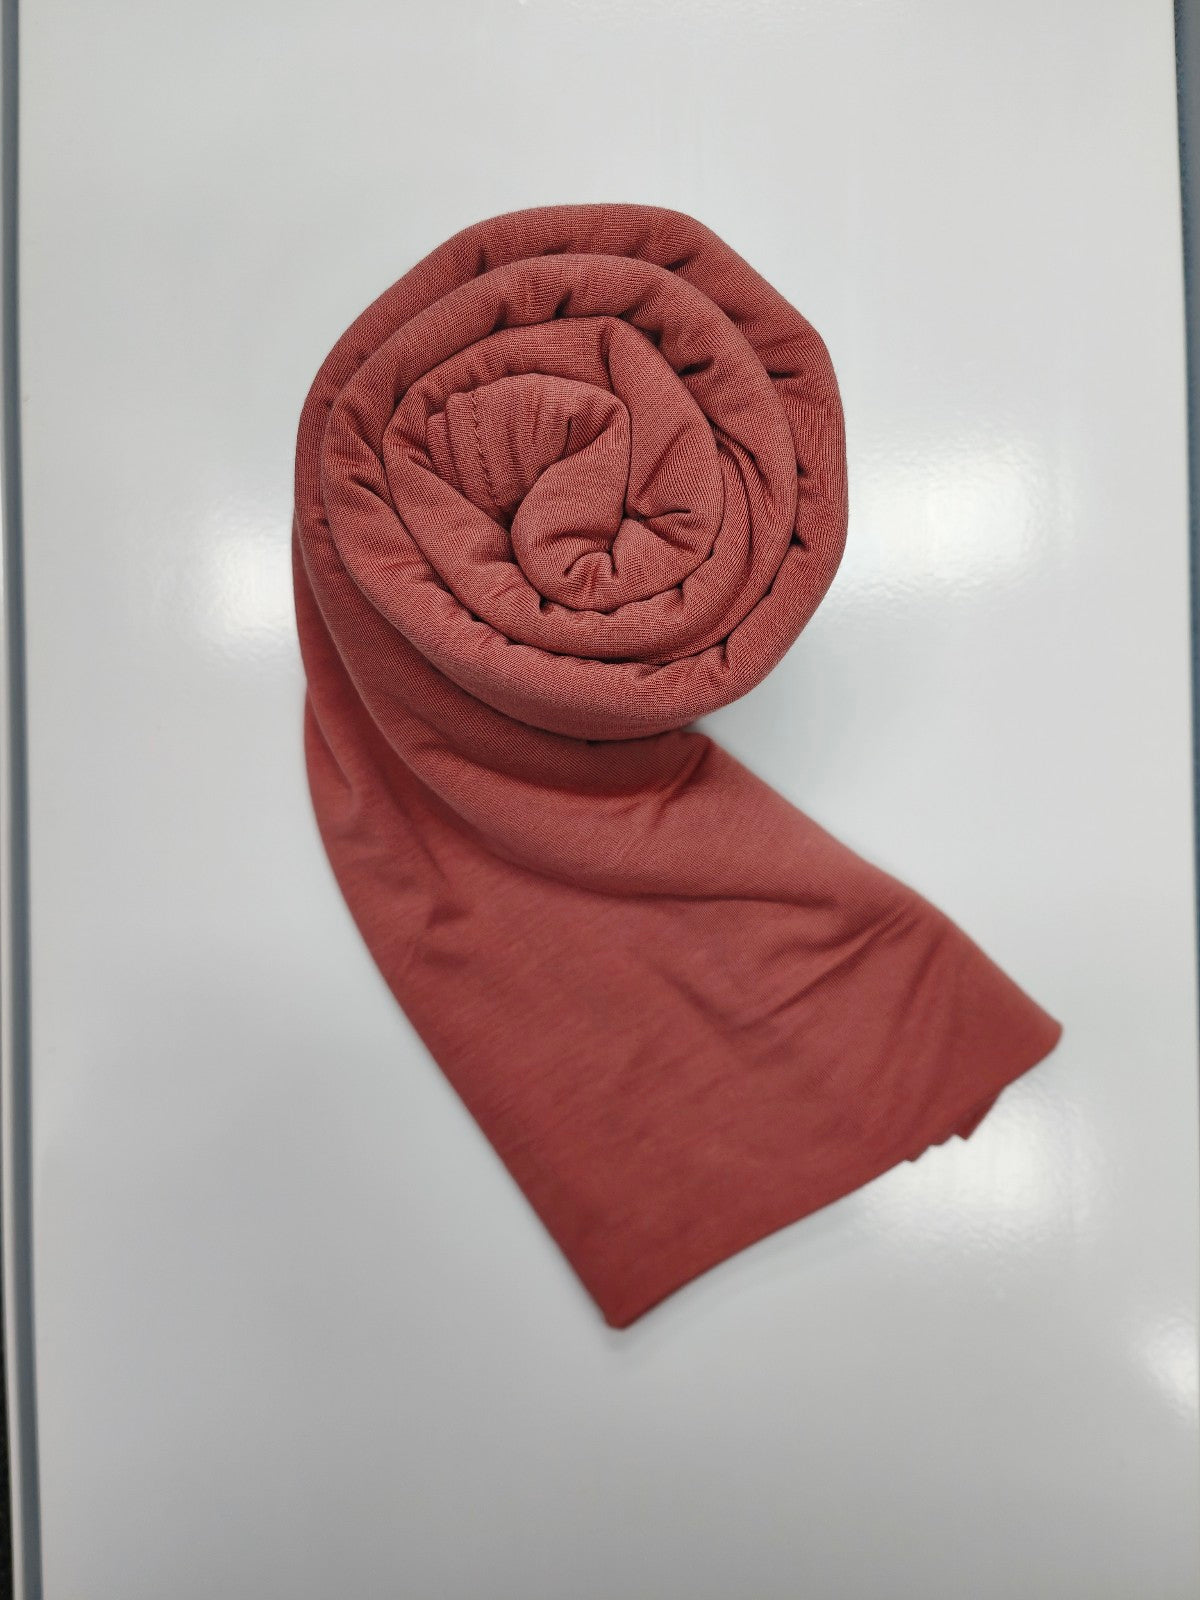 Discover the pinnacle of elegance and comfort with our Coral Pure Bamboo Hijab, exclusively offered by Hikmah Boutique. This hijab seamlessly merges style, breathability, and eco-friendliness, making it the ideal choice for any occasion. Stay cool, confident, and healthy in Pure Bamboo Hijabs from Hikmah Boutique.